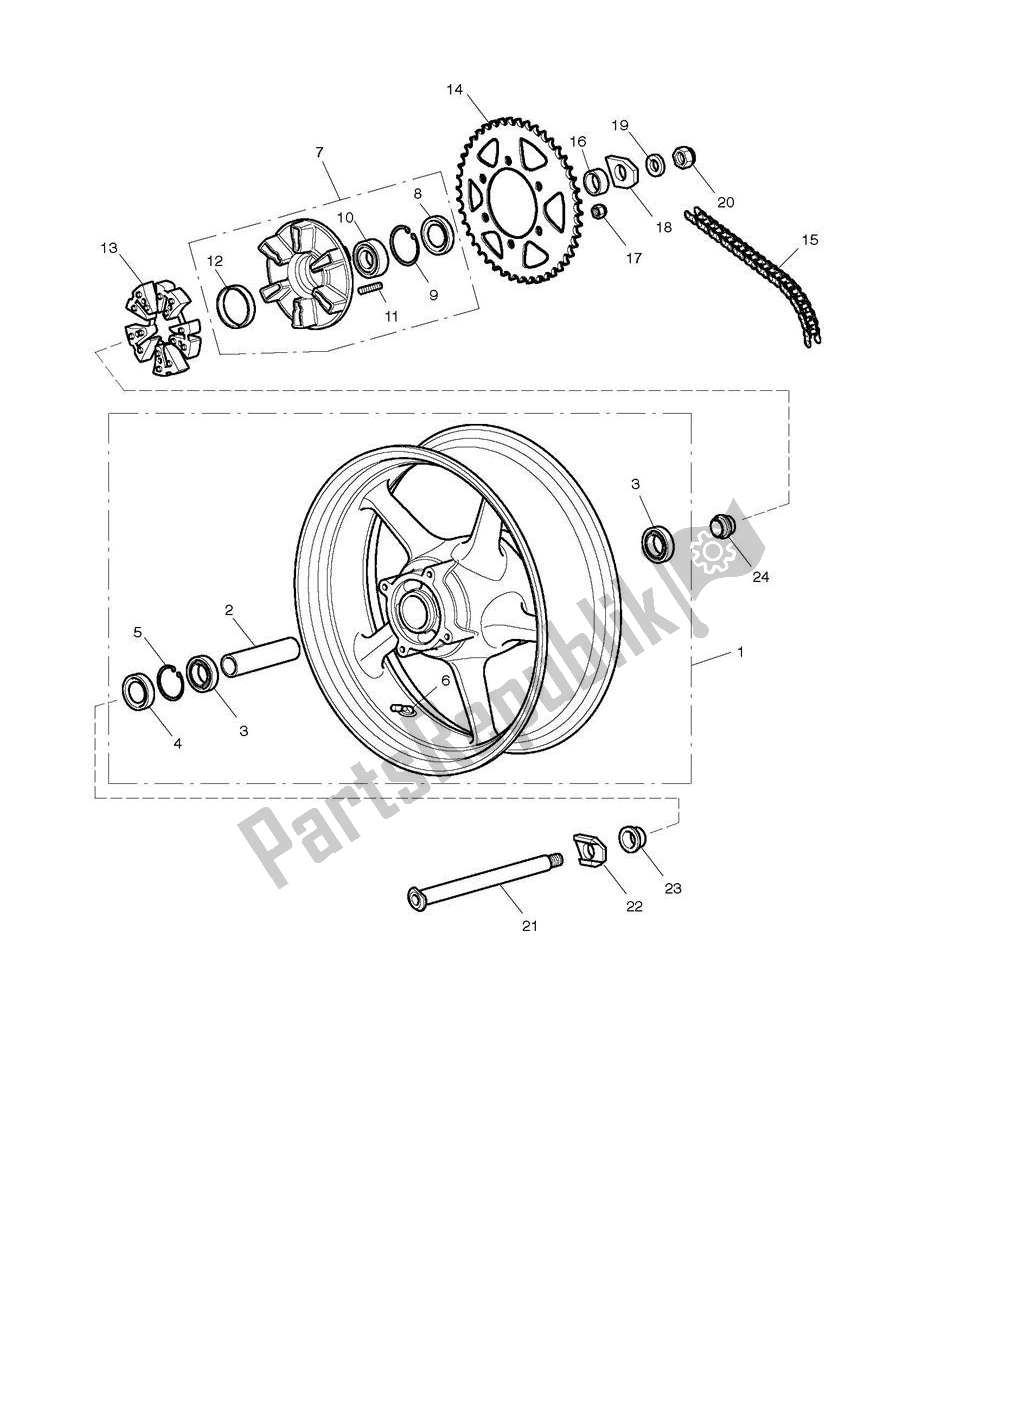 All parts for the Rear Wheel & Final Drive of the Triumph Street Triple 675 2008 - 2012